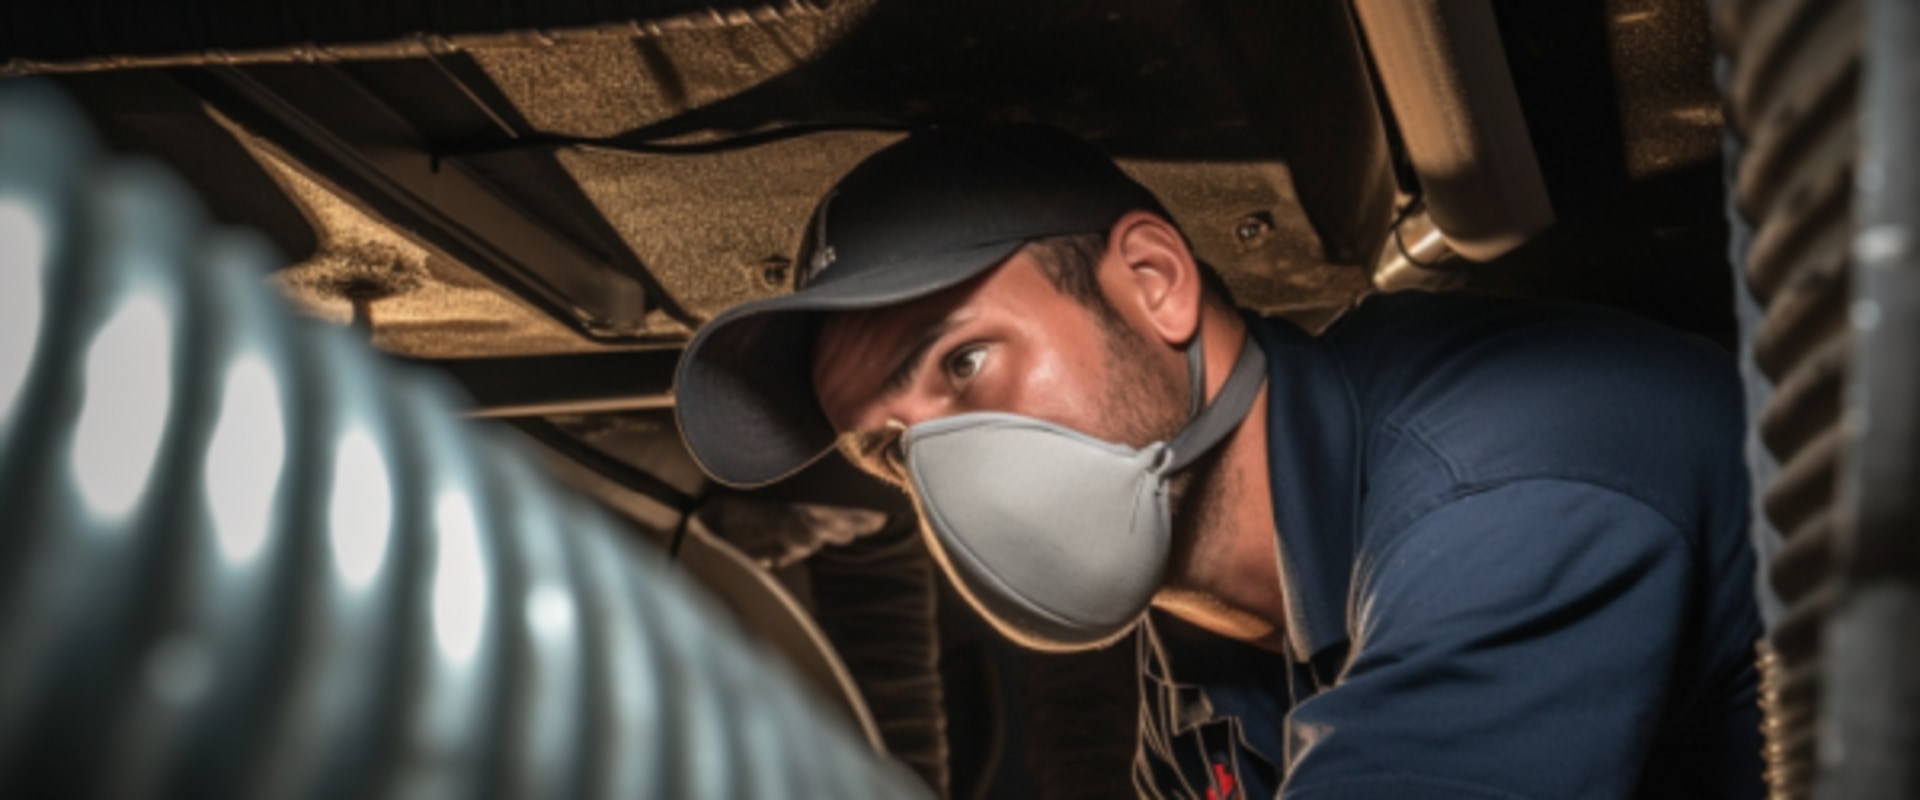 Top Benefits of Duct Sealing Services Near Hialeah FL You Need to Know